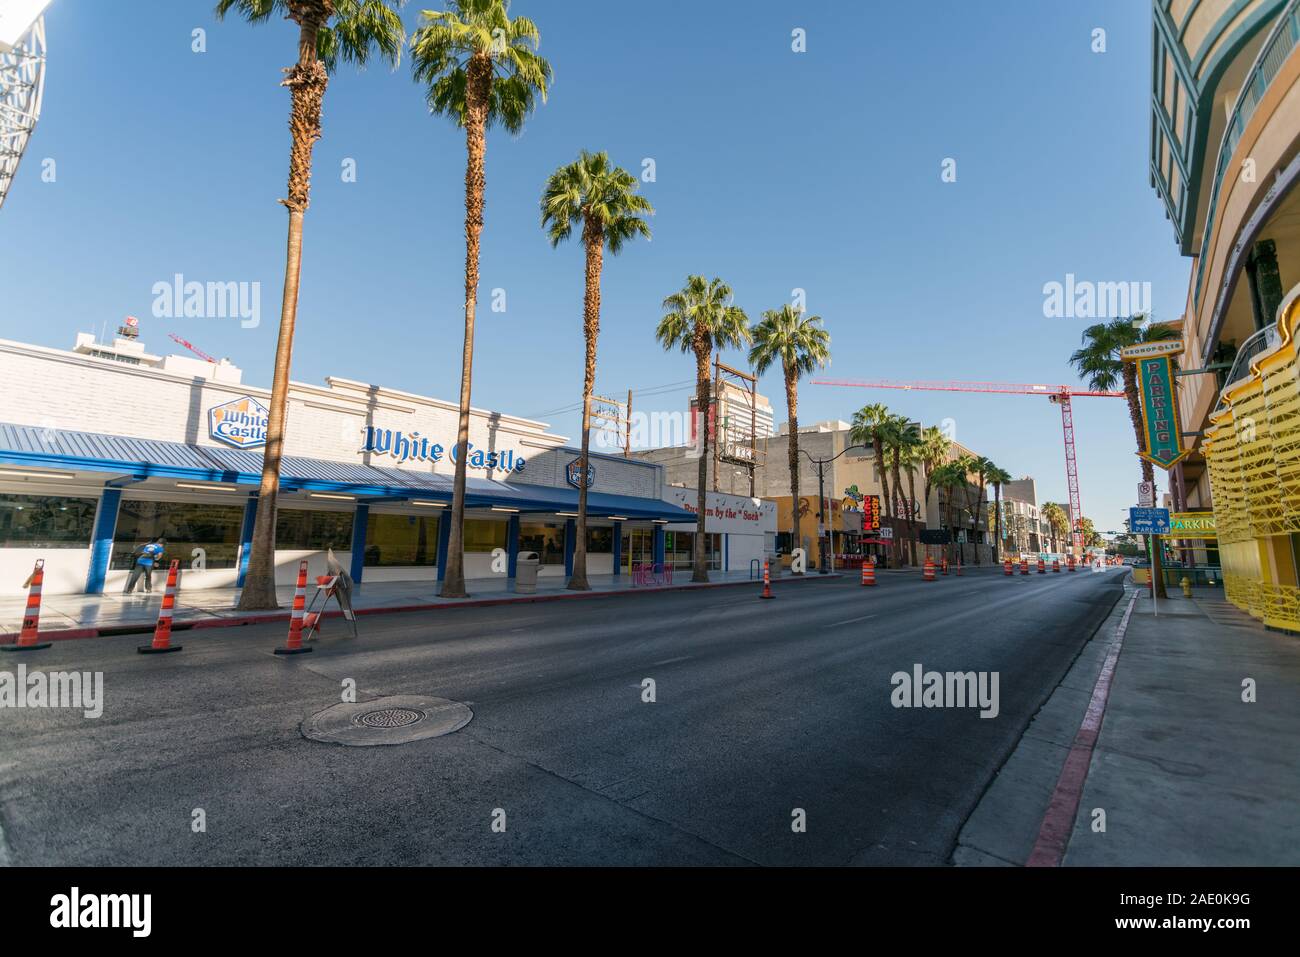 Wide Angle View of Street in Las Vegas with White Castle Restaurant and Palm Trees Stock Photo